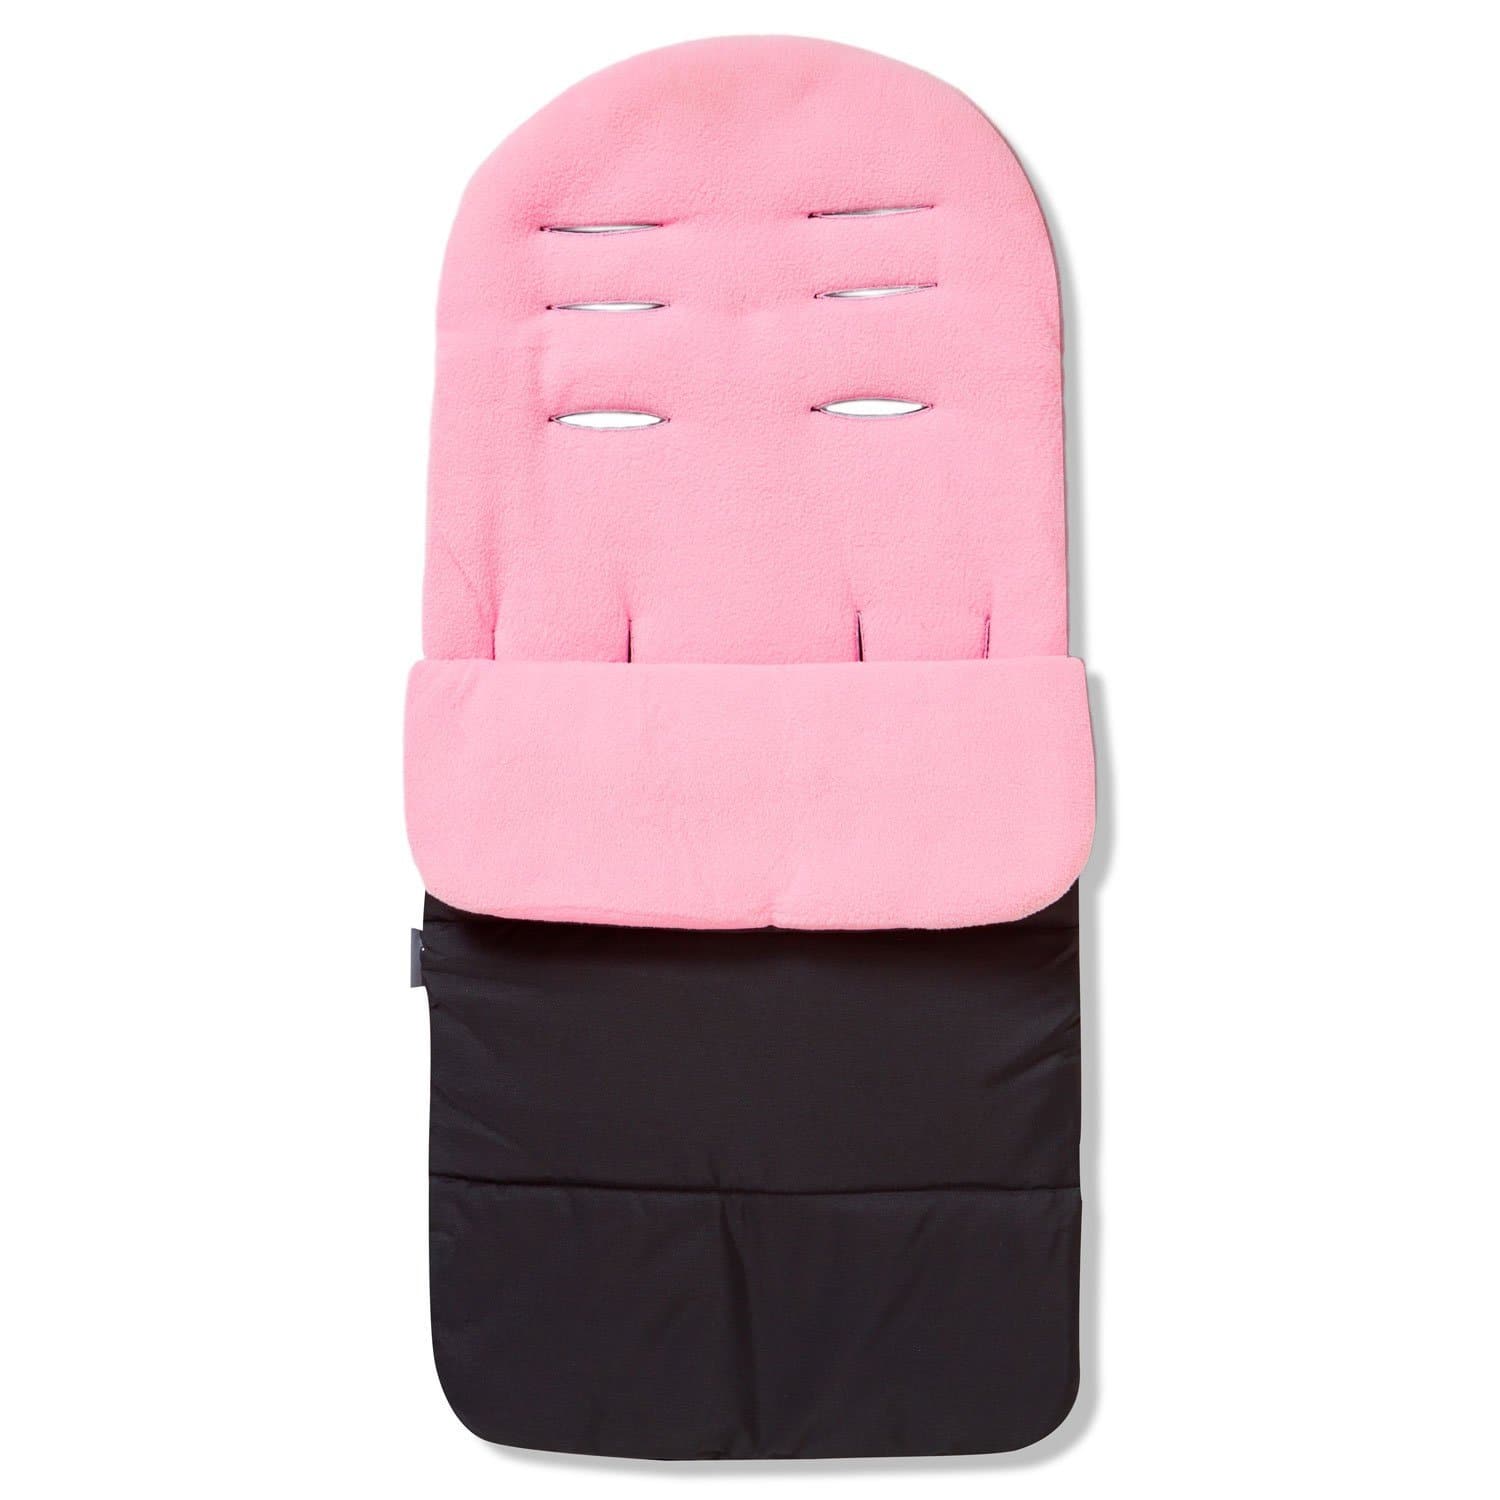 Premium Footmuff / Cosy Toes Compatible with Kiddicouture - Candy Pink / Fits All Models | For Your Little One